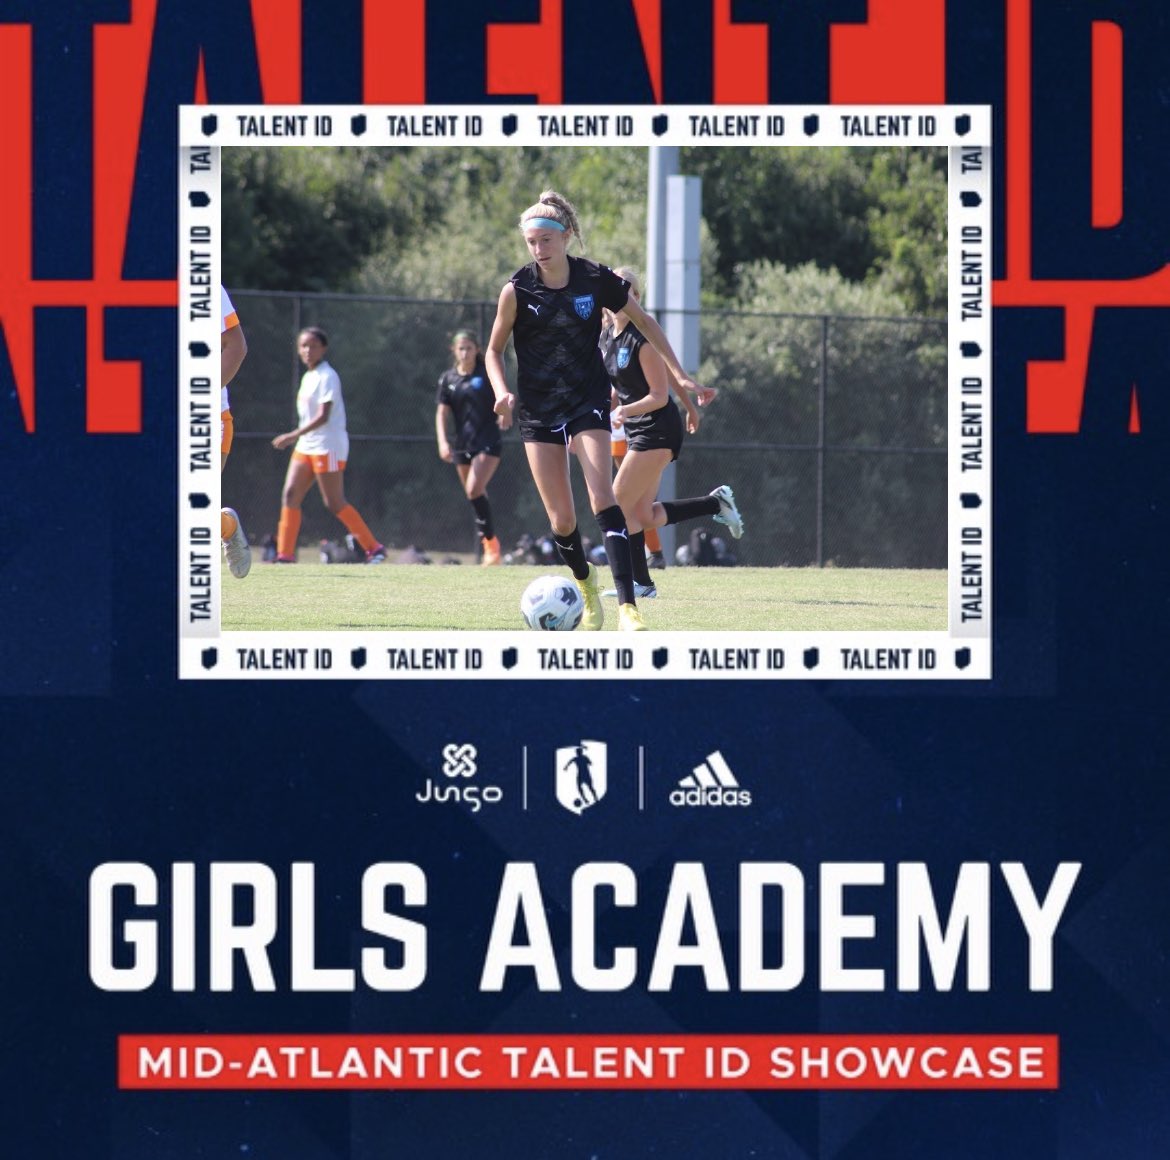 Thank you @GAcademy for the invite to the Mid-Atlantic Talent ID! Looking forward to Friday and playing with some great 2009 players from our conference. #GATalentID @bobbypup @TopDrawerSoccer @ImYouthSoccer @TheSoccerWire @PrepSoccer